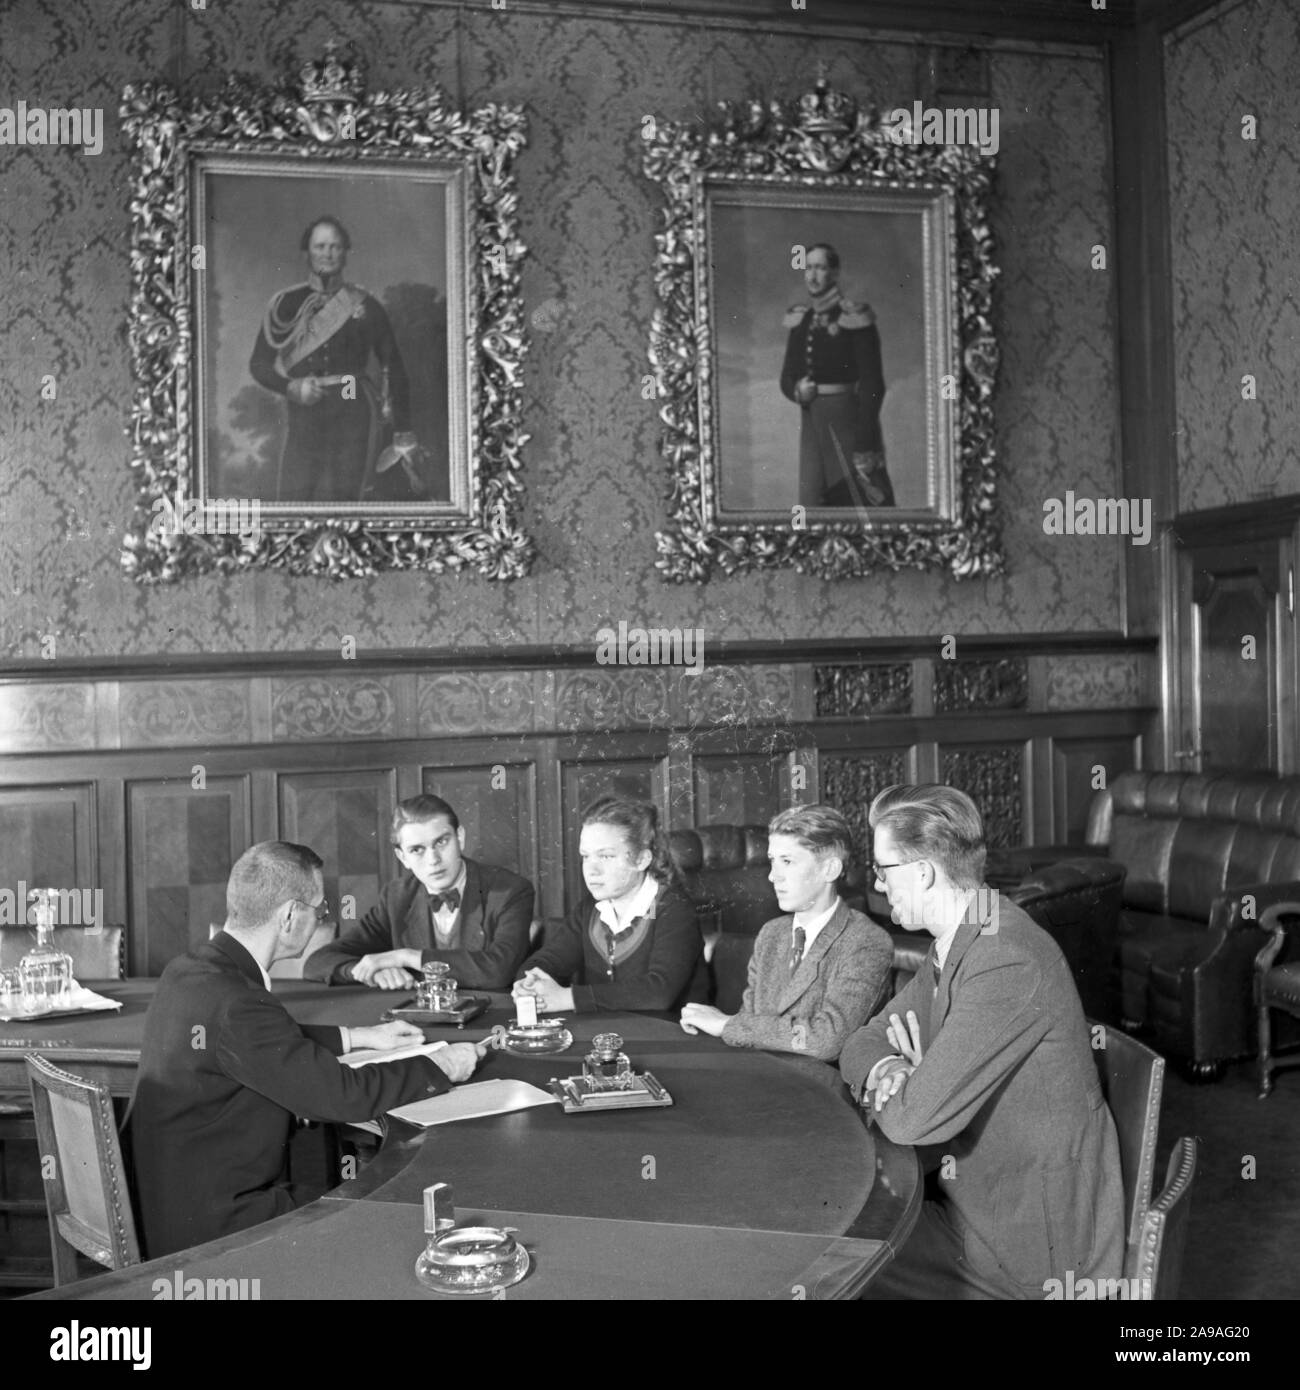 Apprentices doing their final oral exam at the end of their apprenticeship in a bank, Germany 1940s. Stock Photo